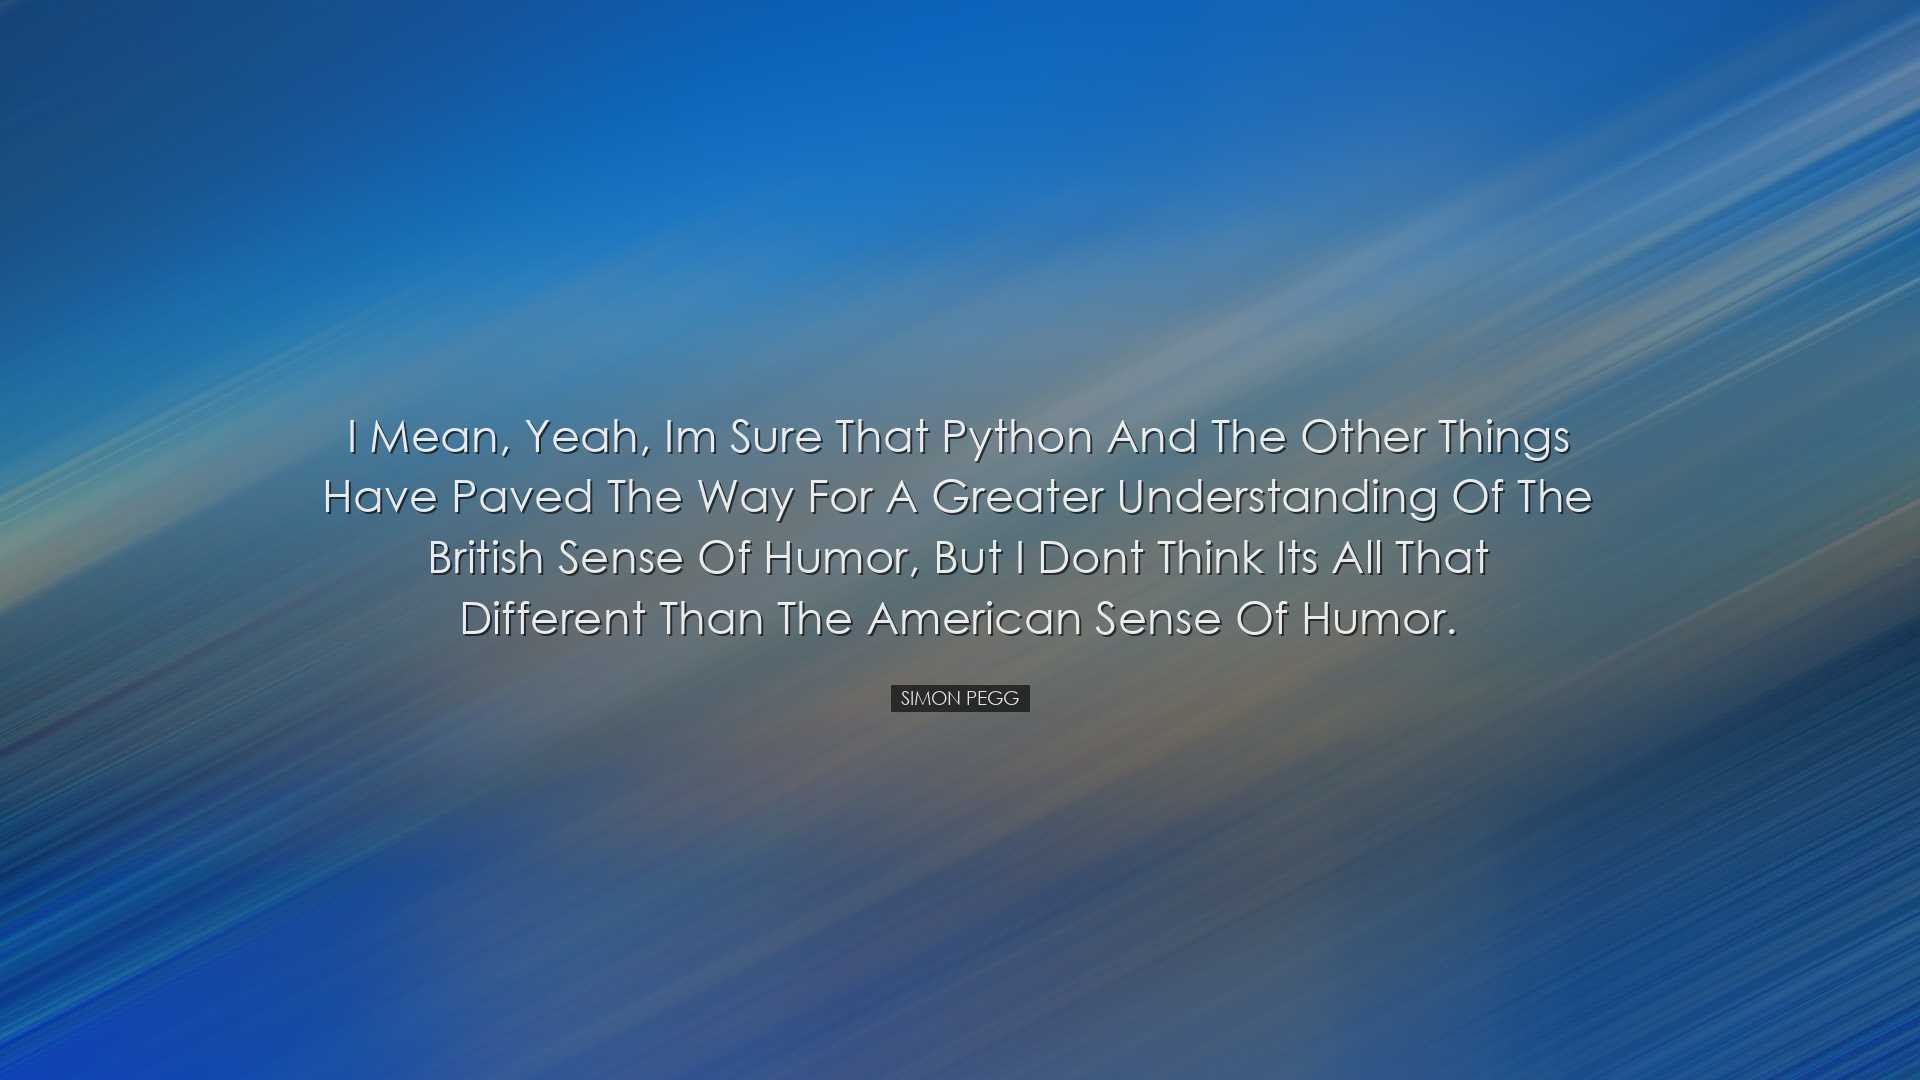 I mean, yeah, Im sure that Python and the other things have paved